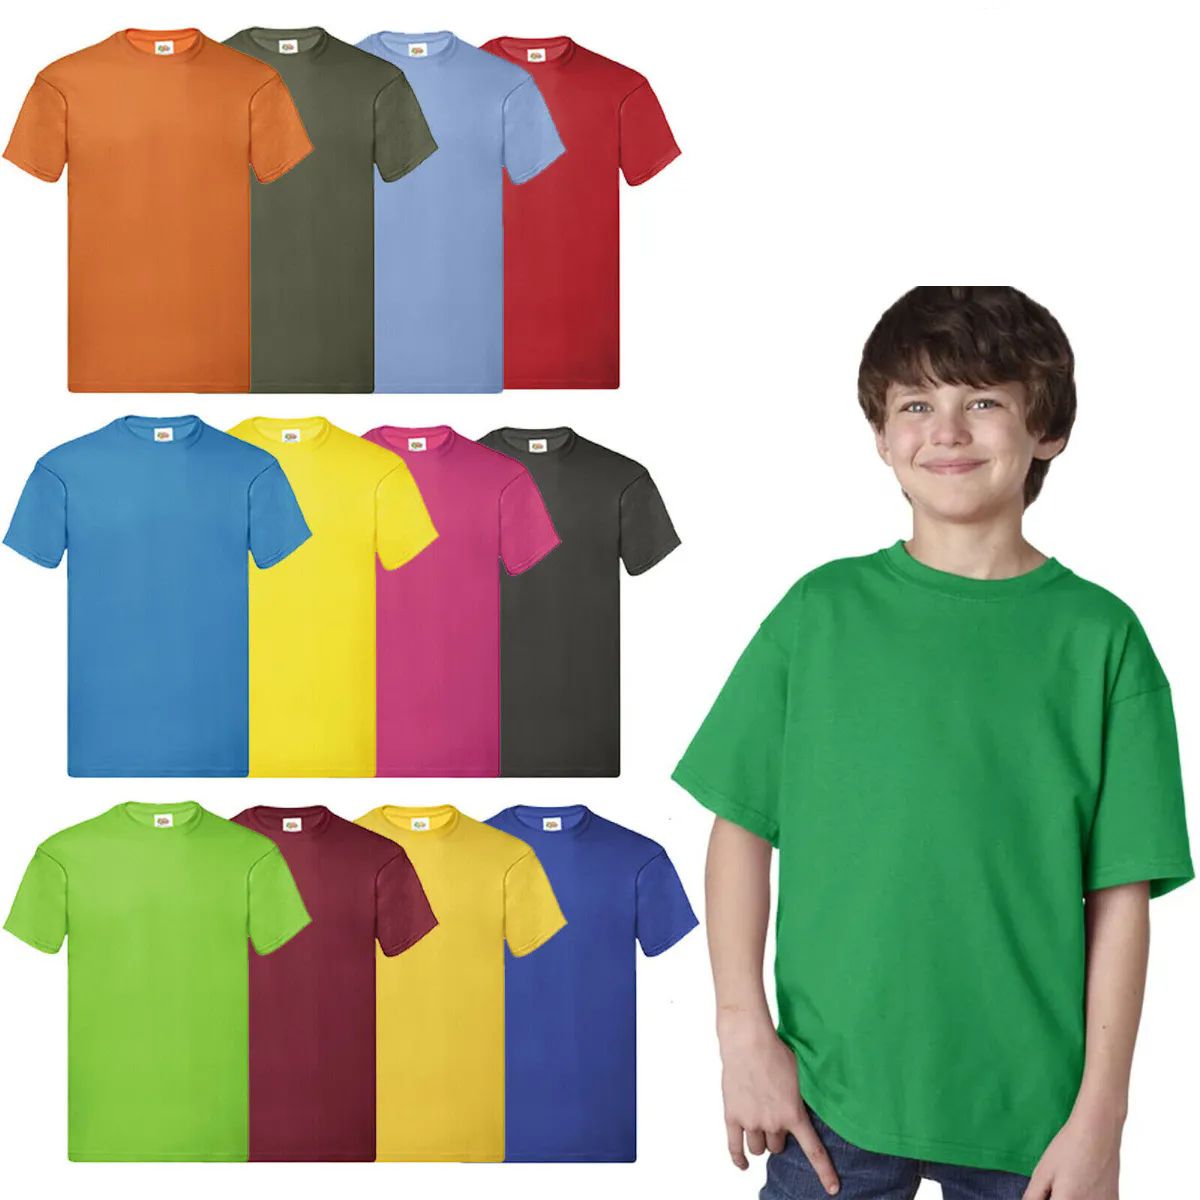 12 Pieces of Billionhats Kids Youth Cotton Assorted Colors T-Shirts Size Large